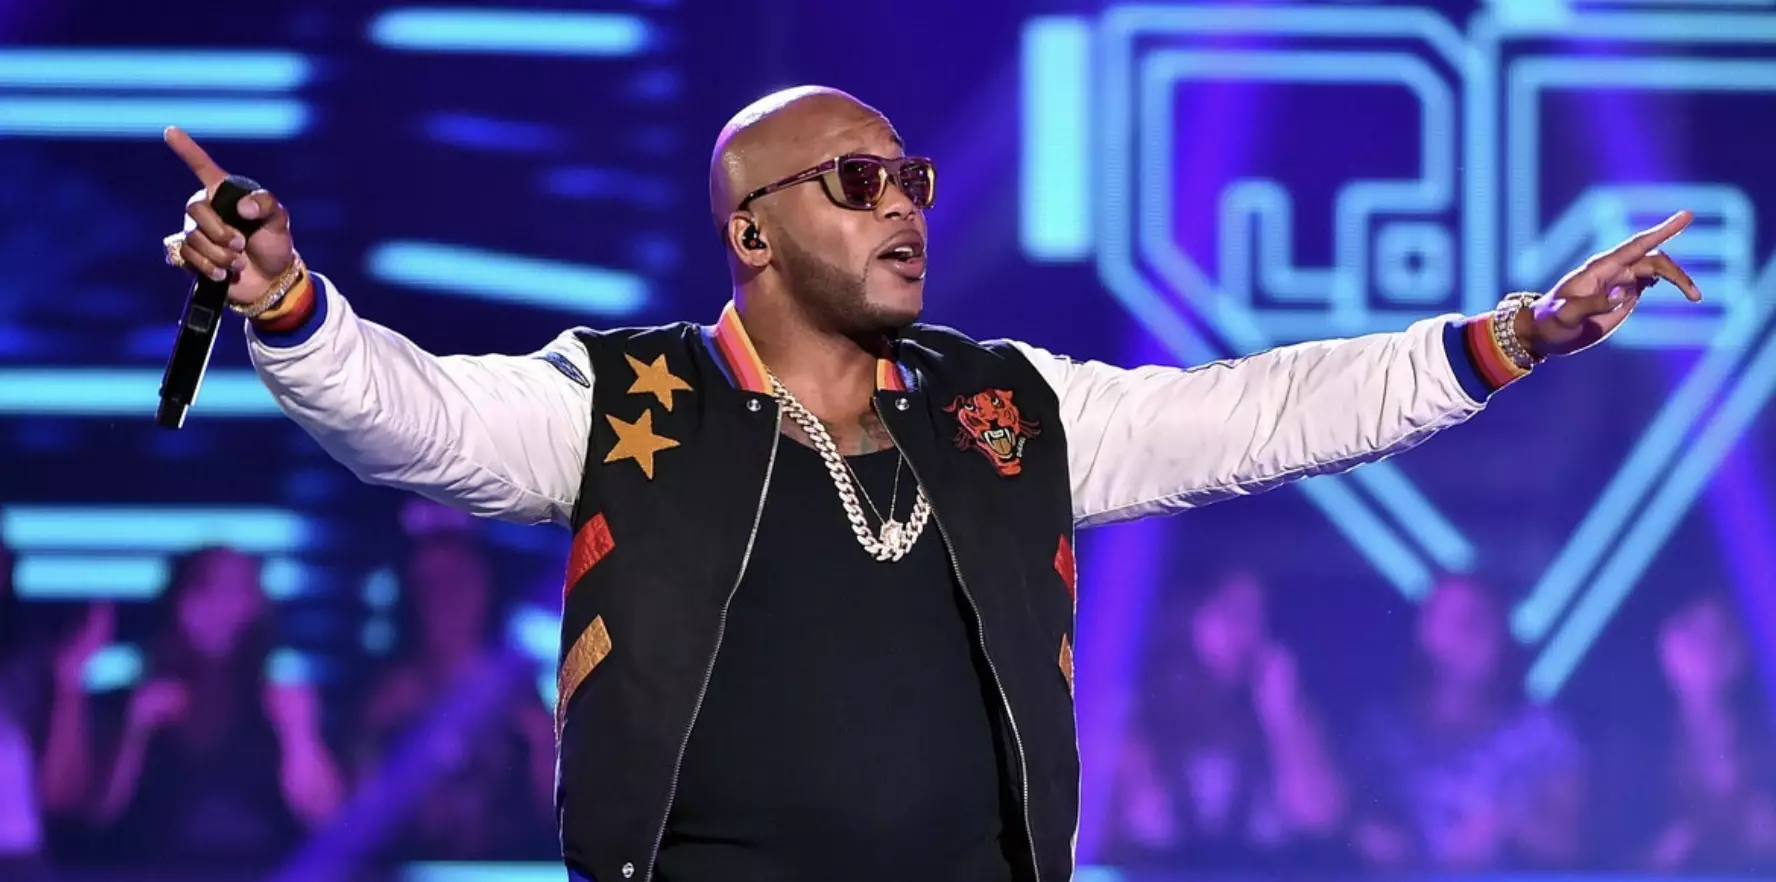 Flo Rida has achieved five No 1 singles in the UK